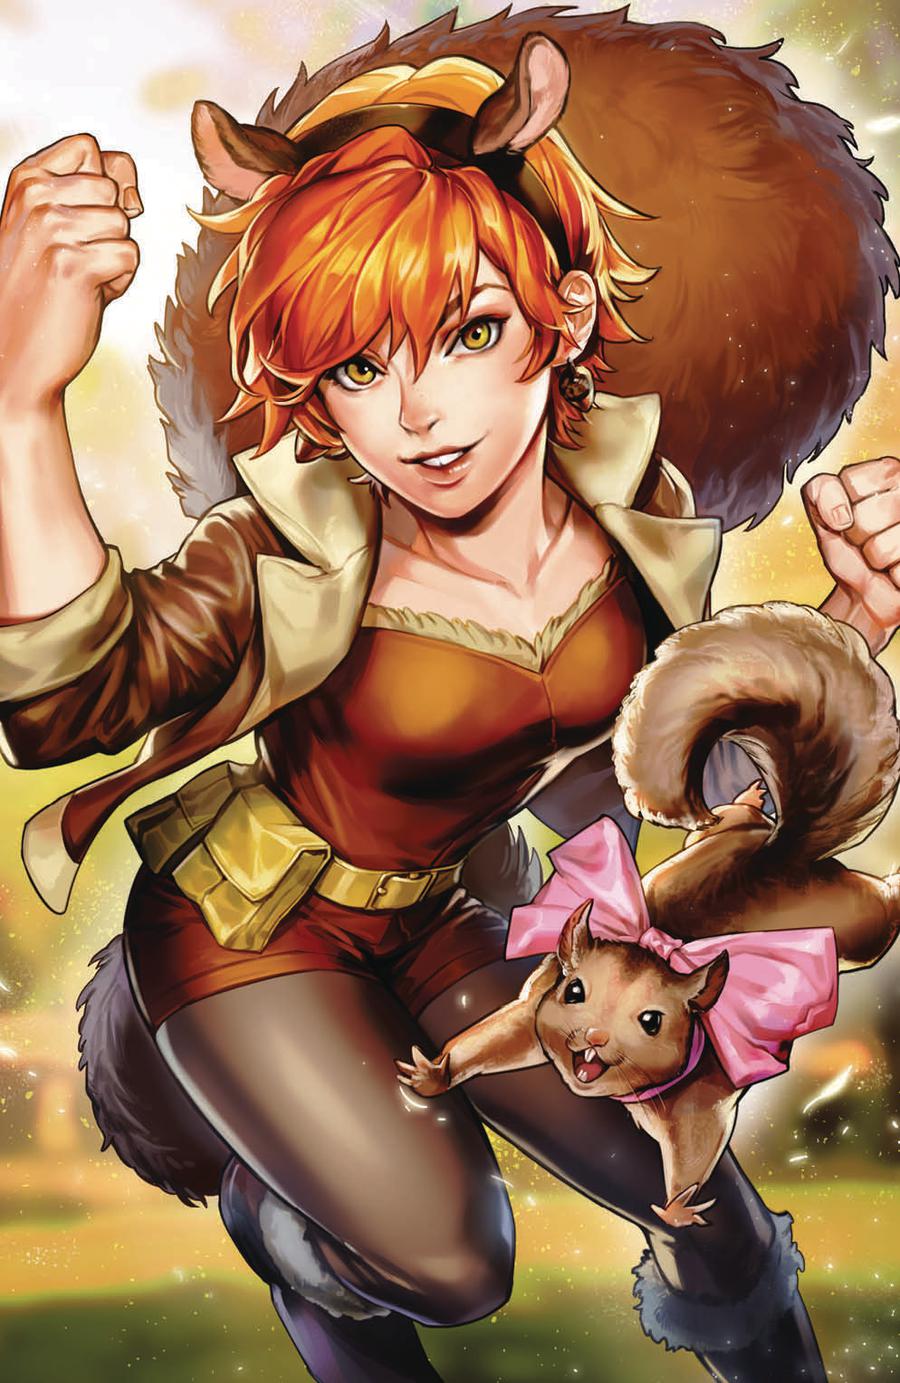 Unbeatable Squirrel Girl Vol 2 #44 Cover B Variant Sujin Jo Marvel Battle Lines Cover (War Of The Realms Tie-In)